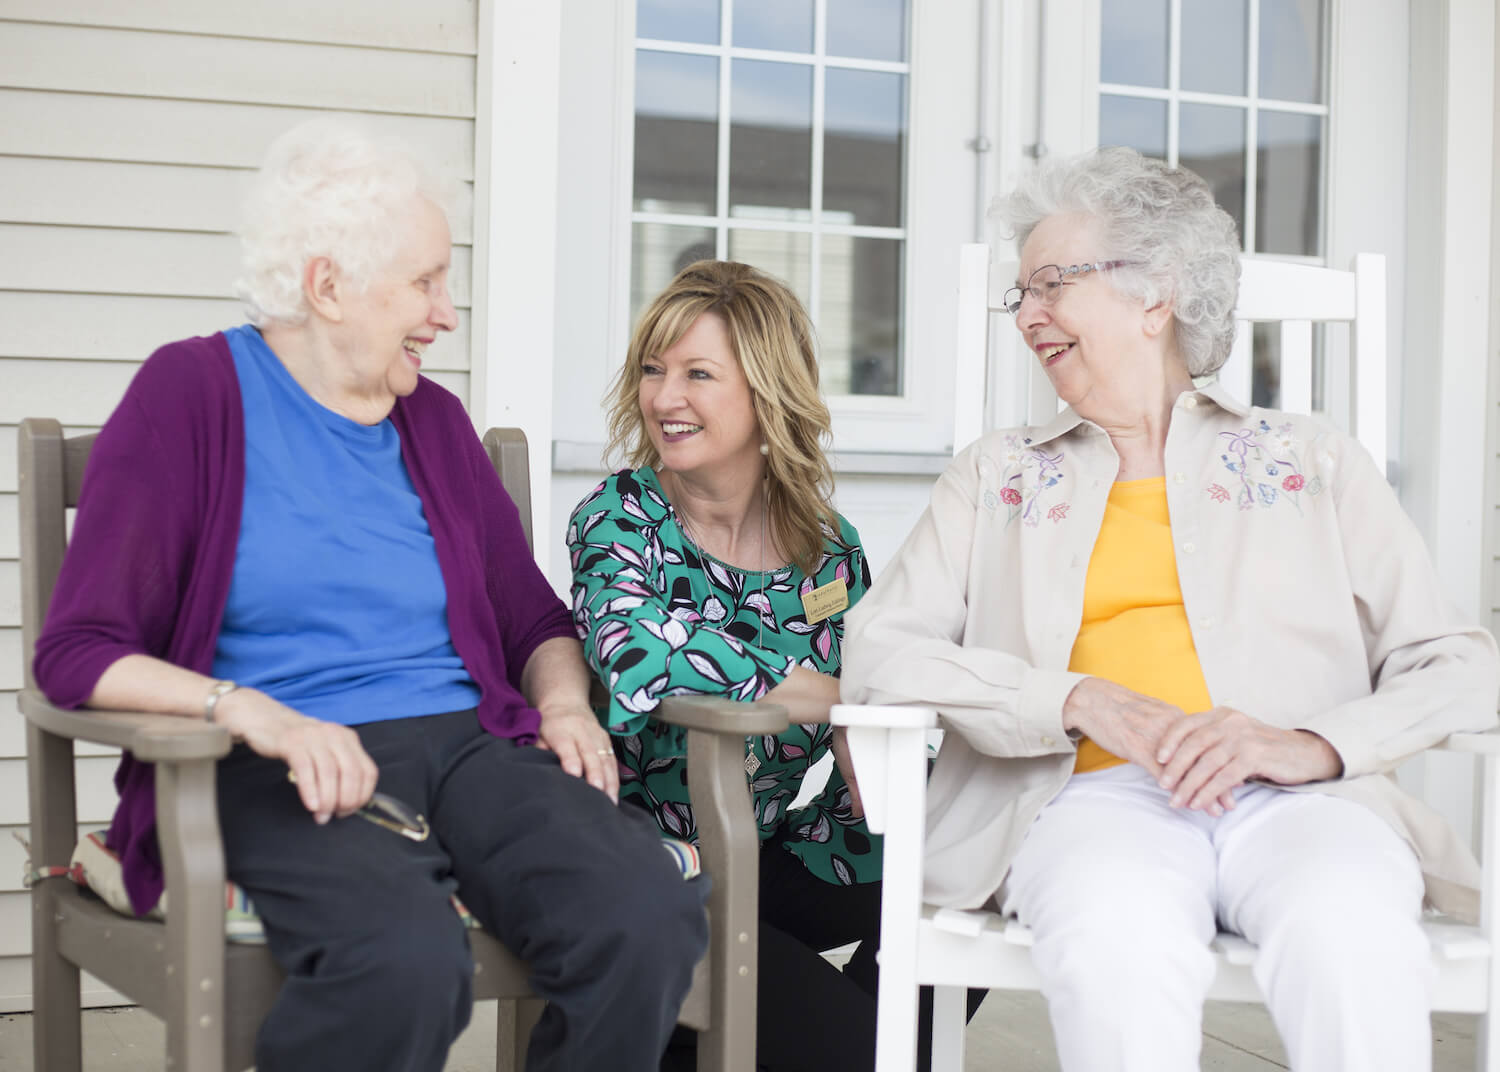 Two residents and a caregiver sitting outside together